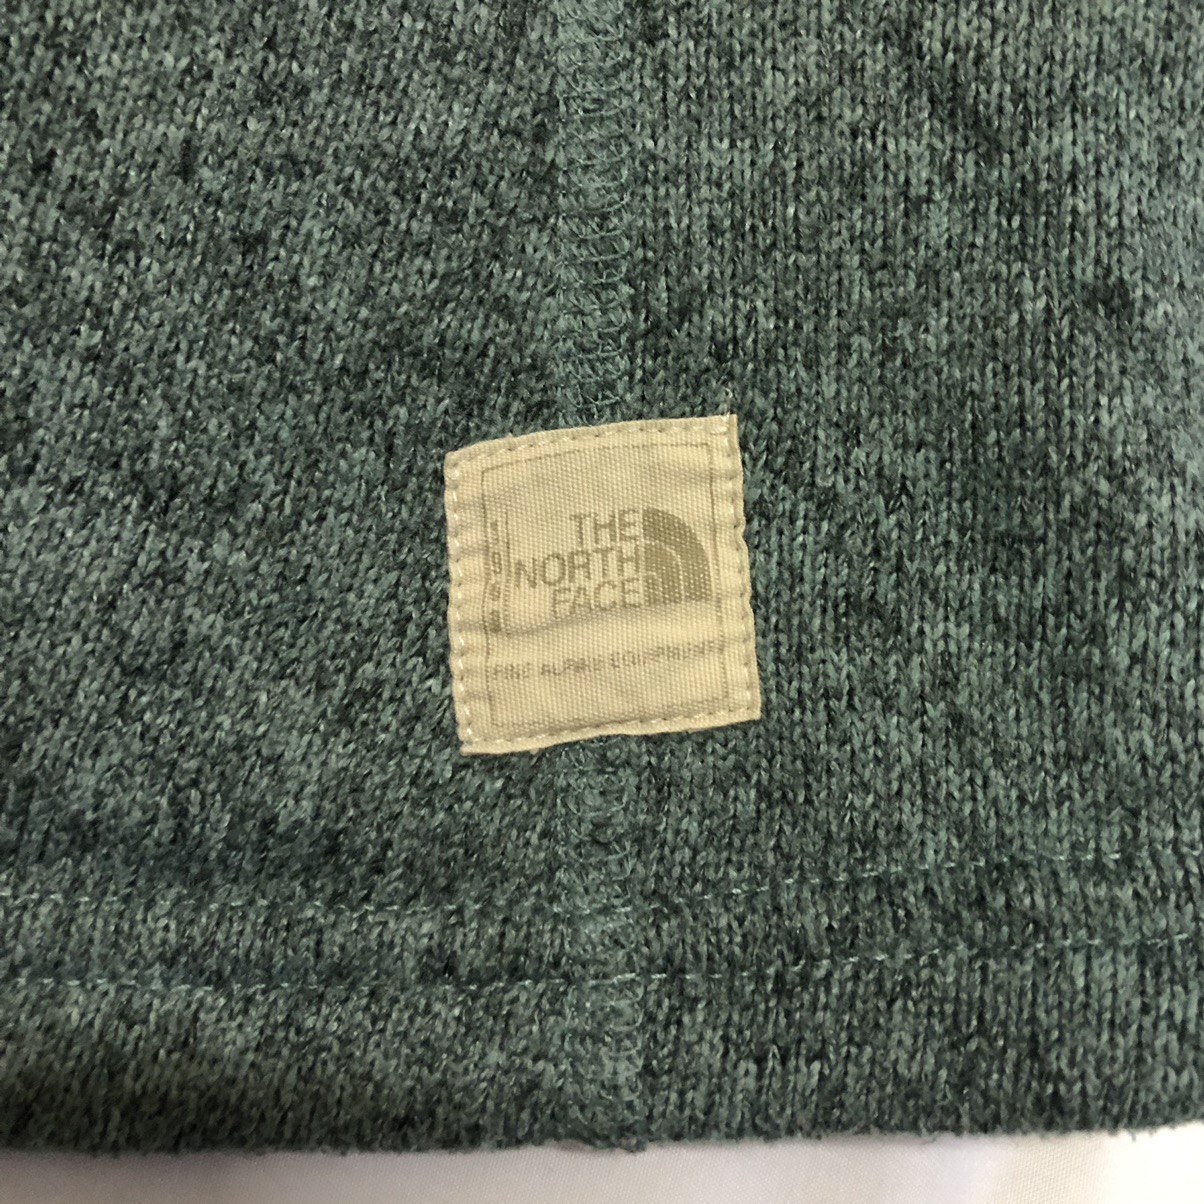 The North Face sweater fleece 1/4 toggle button - 10